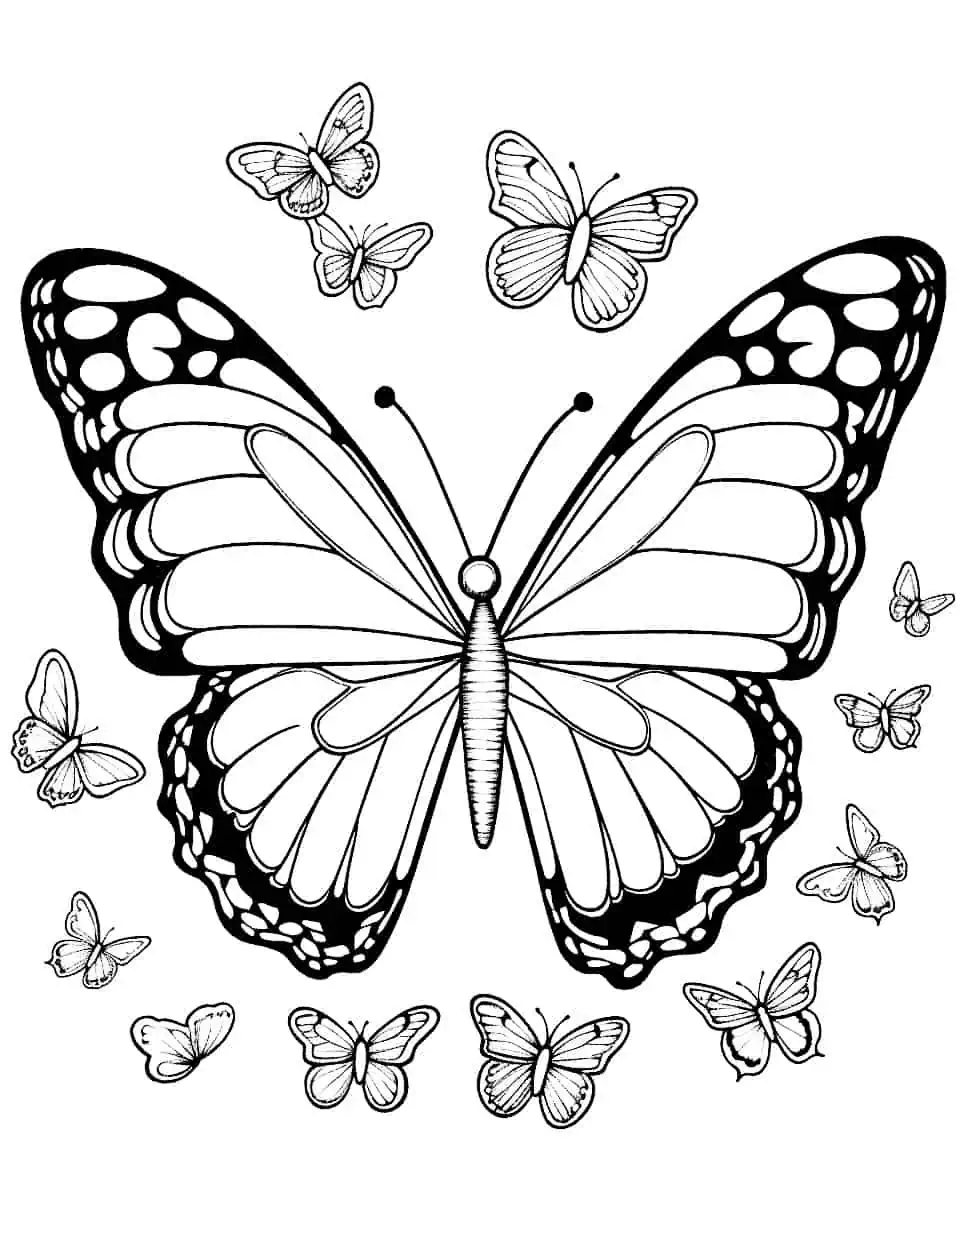 Magical Monarchs Butterfly Coloring Page - A majestic coloring page highlighting the regal beauty of monarch butterflies.